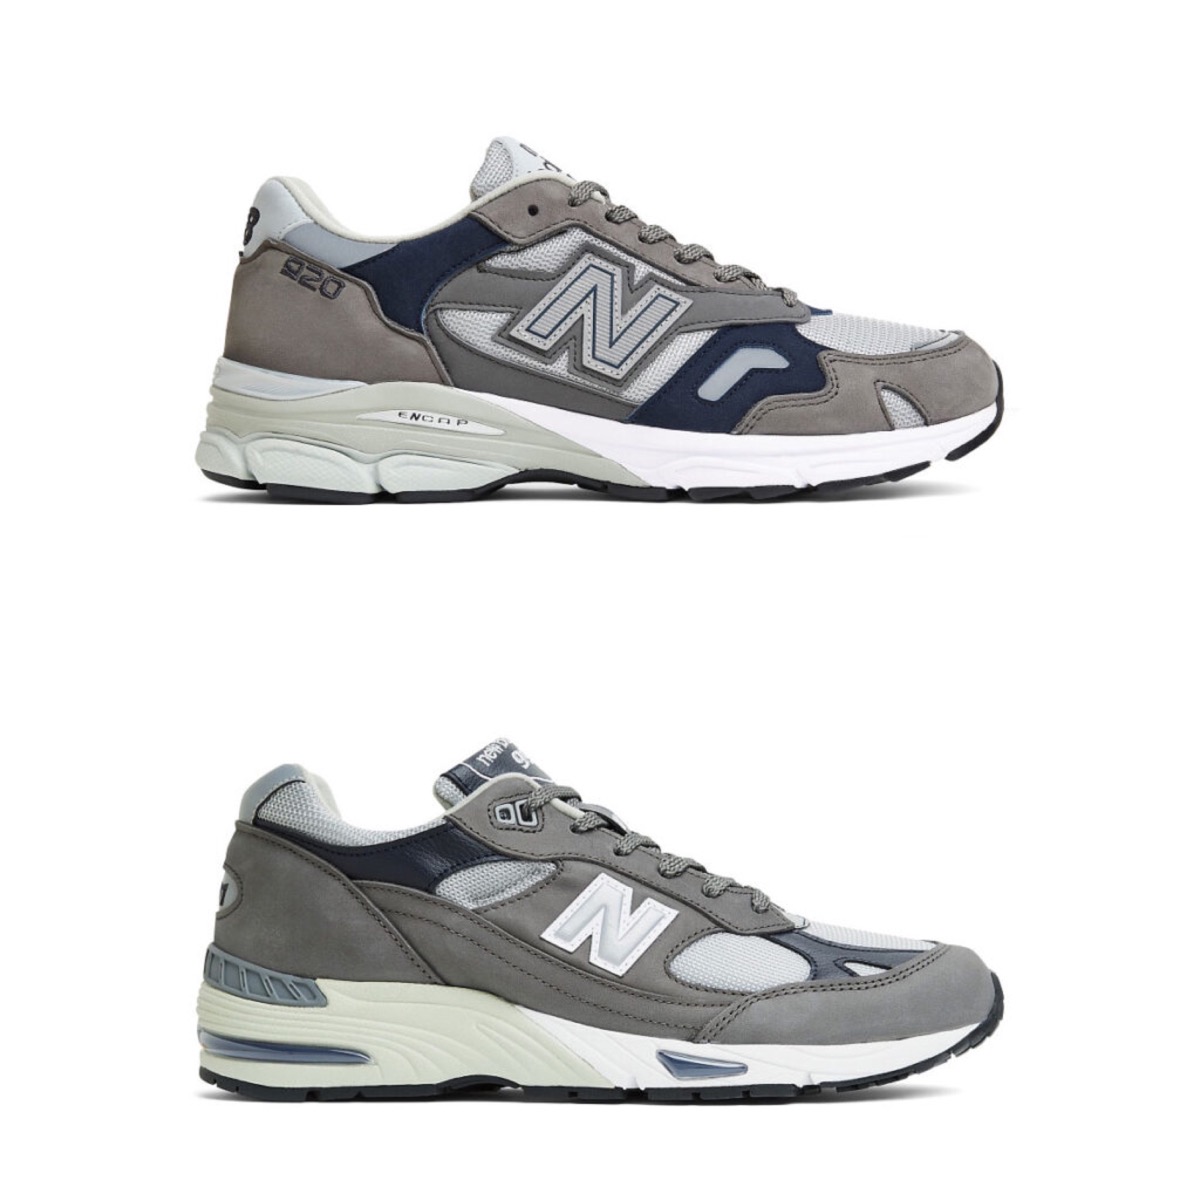 Recuerdo caliente Escabullirse New Balance 『920 & 991 “Grey/Navy”』が国内10月21日より発売予定 ［M920GNS / M991GNS］ | UP  TO DATE